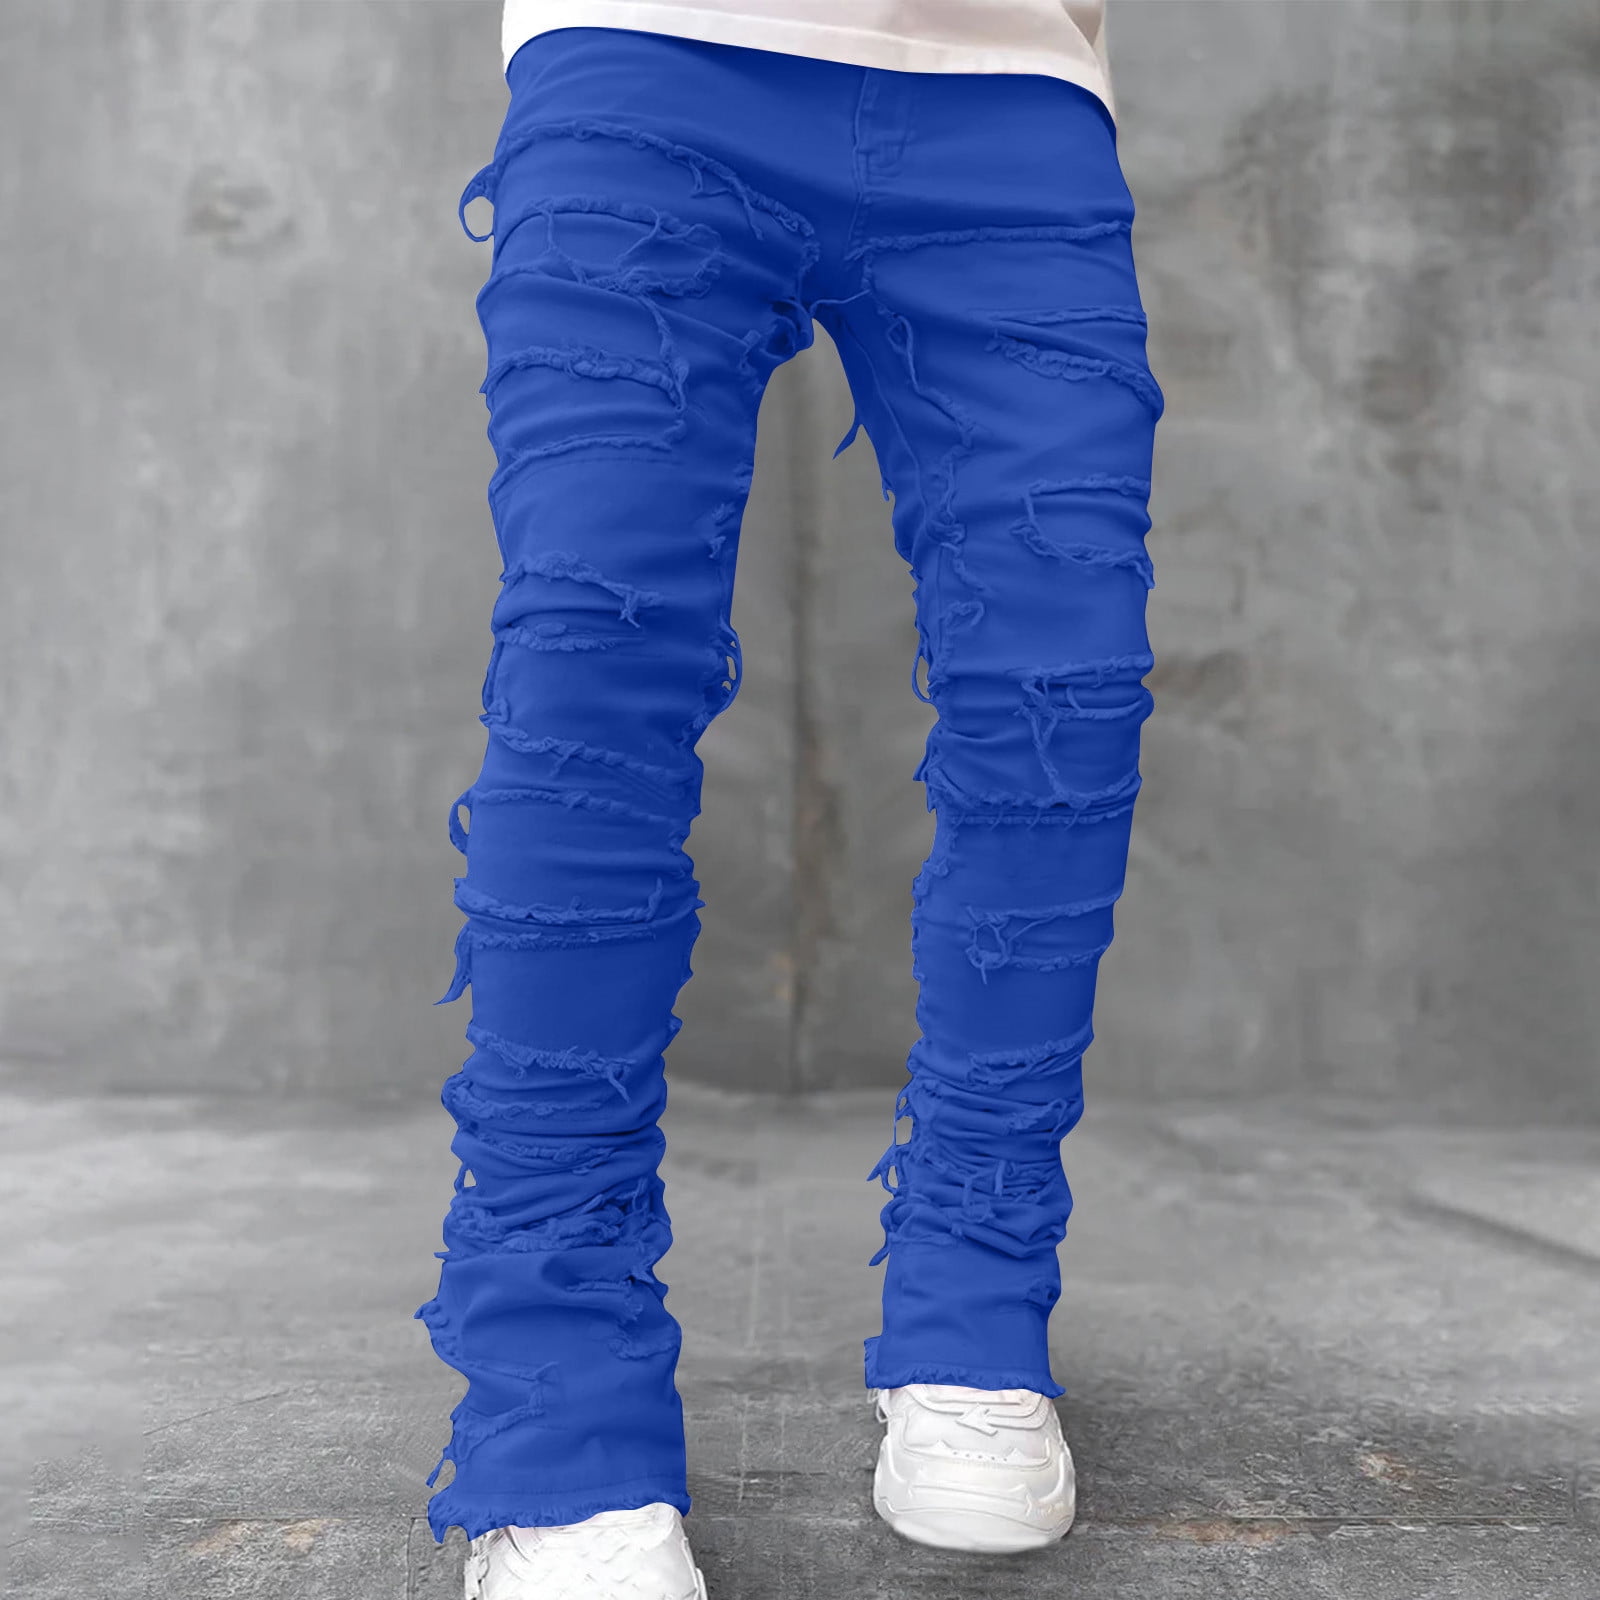 Blue Jeans For Men: Ripped, Skinny, Royal, Navy, Blue Jeans